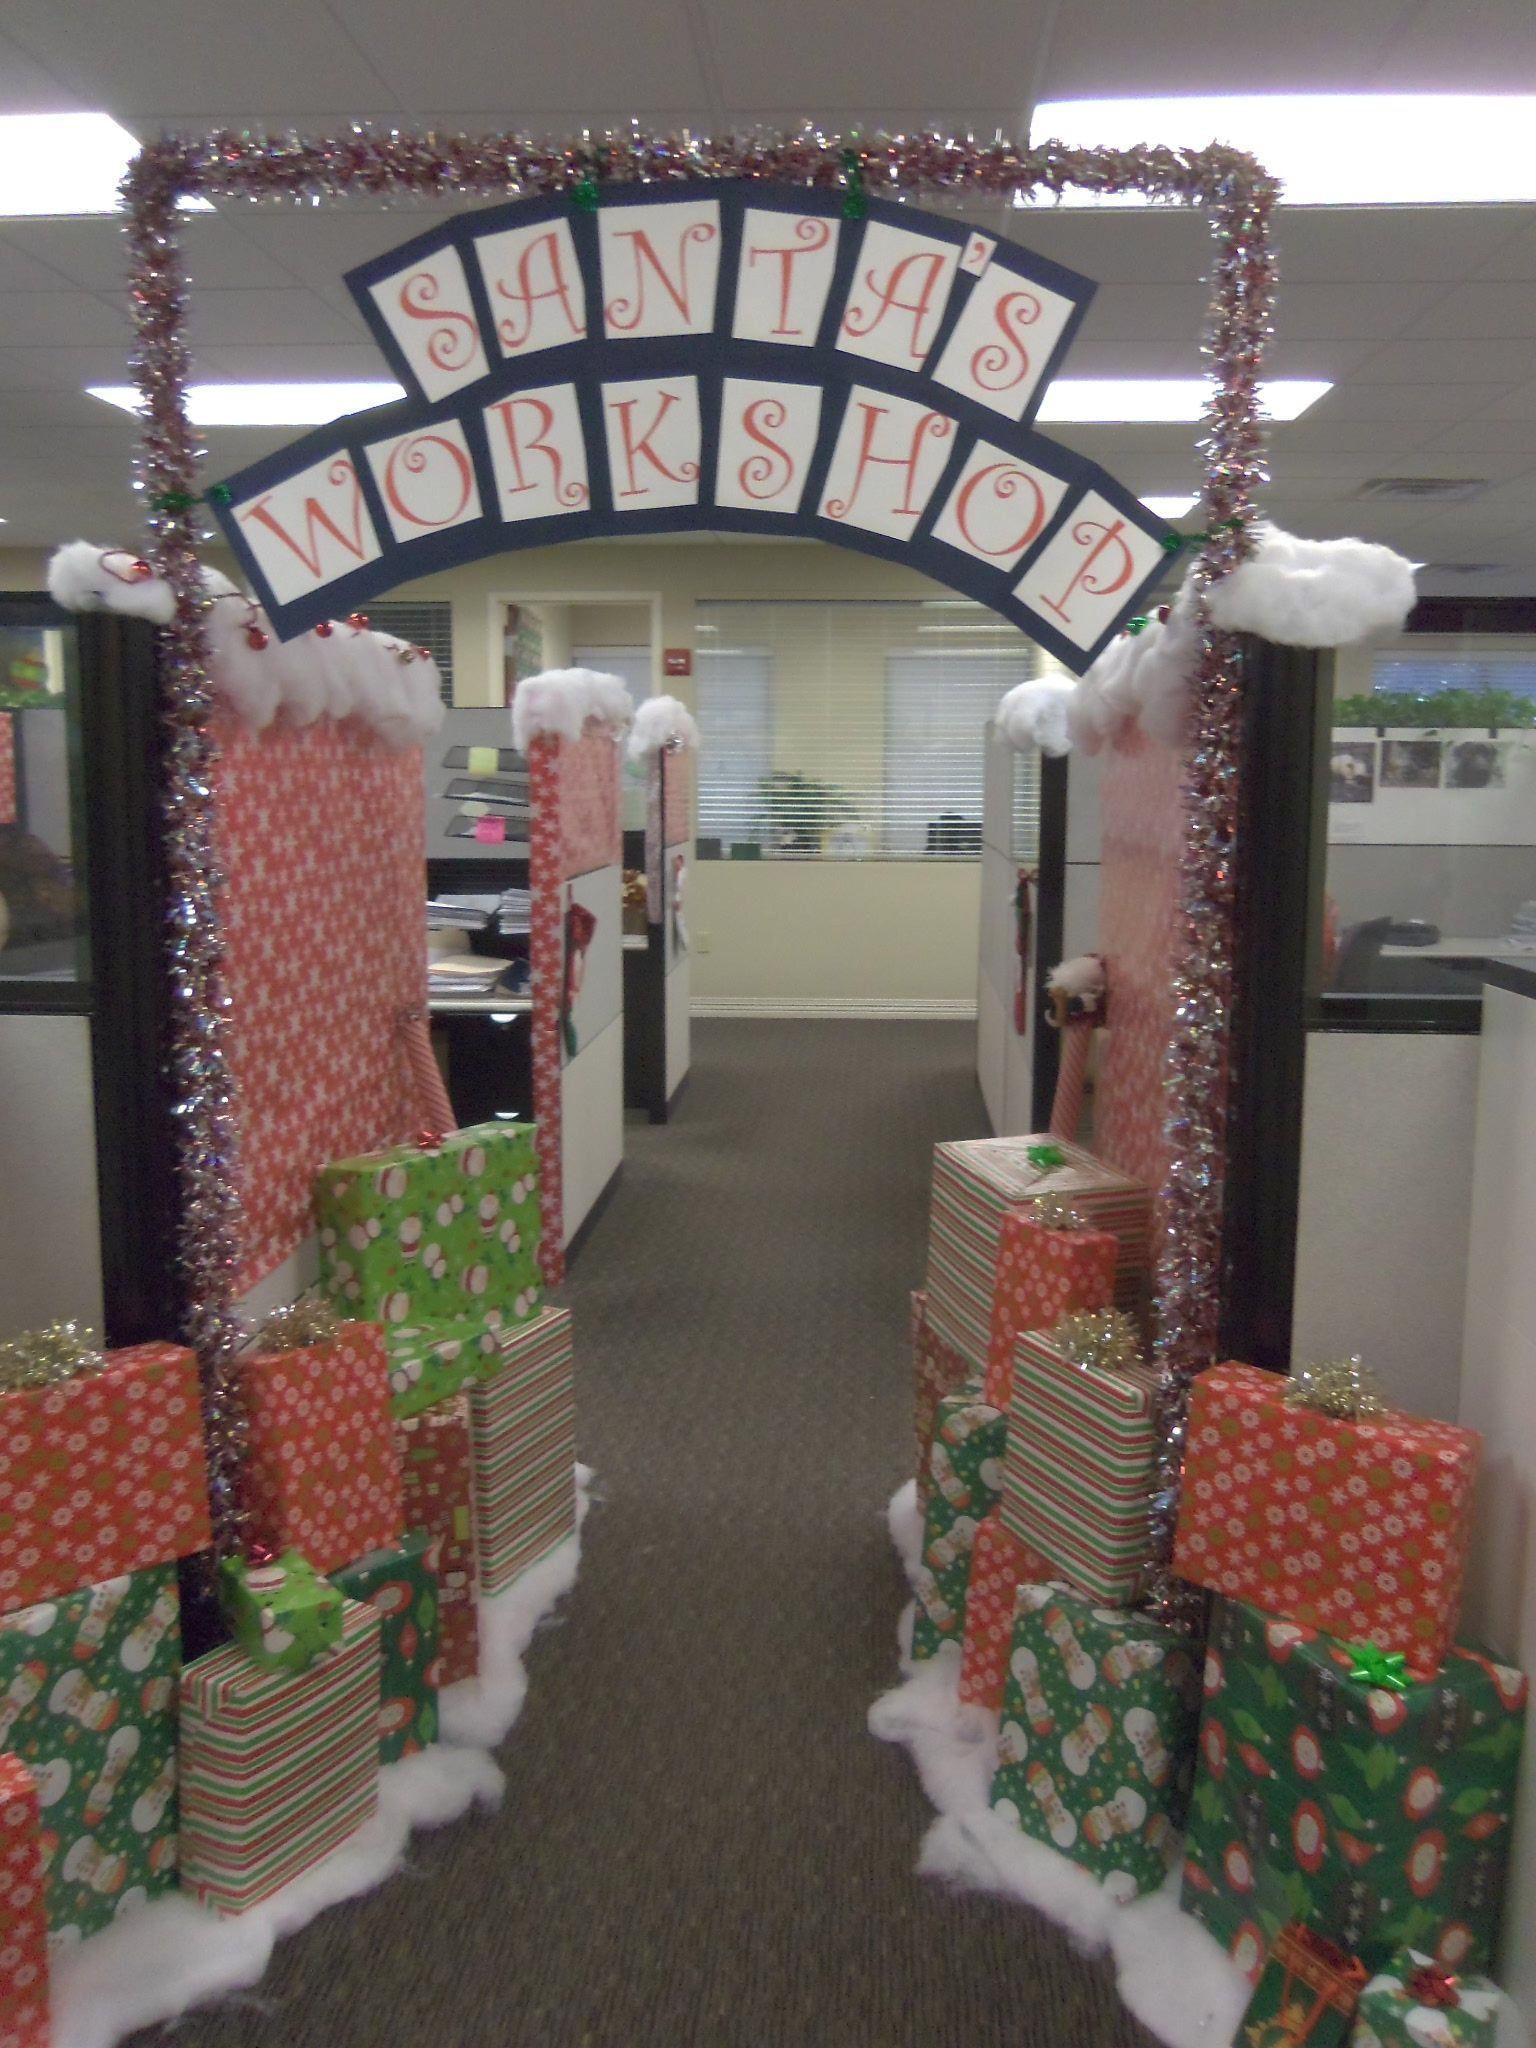 Office Christmas Party Decoration Ideas
 Christmas decorations can boost morale at the office